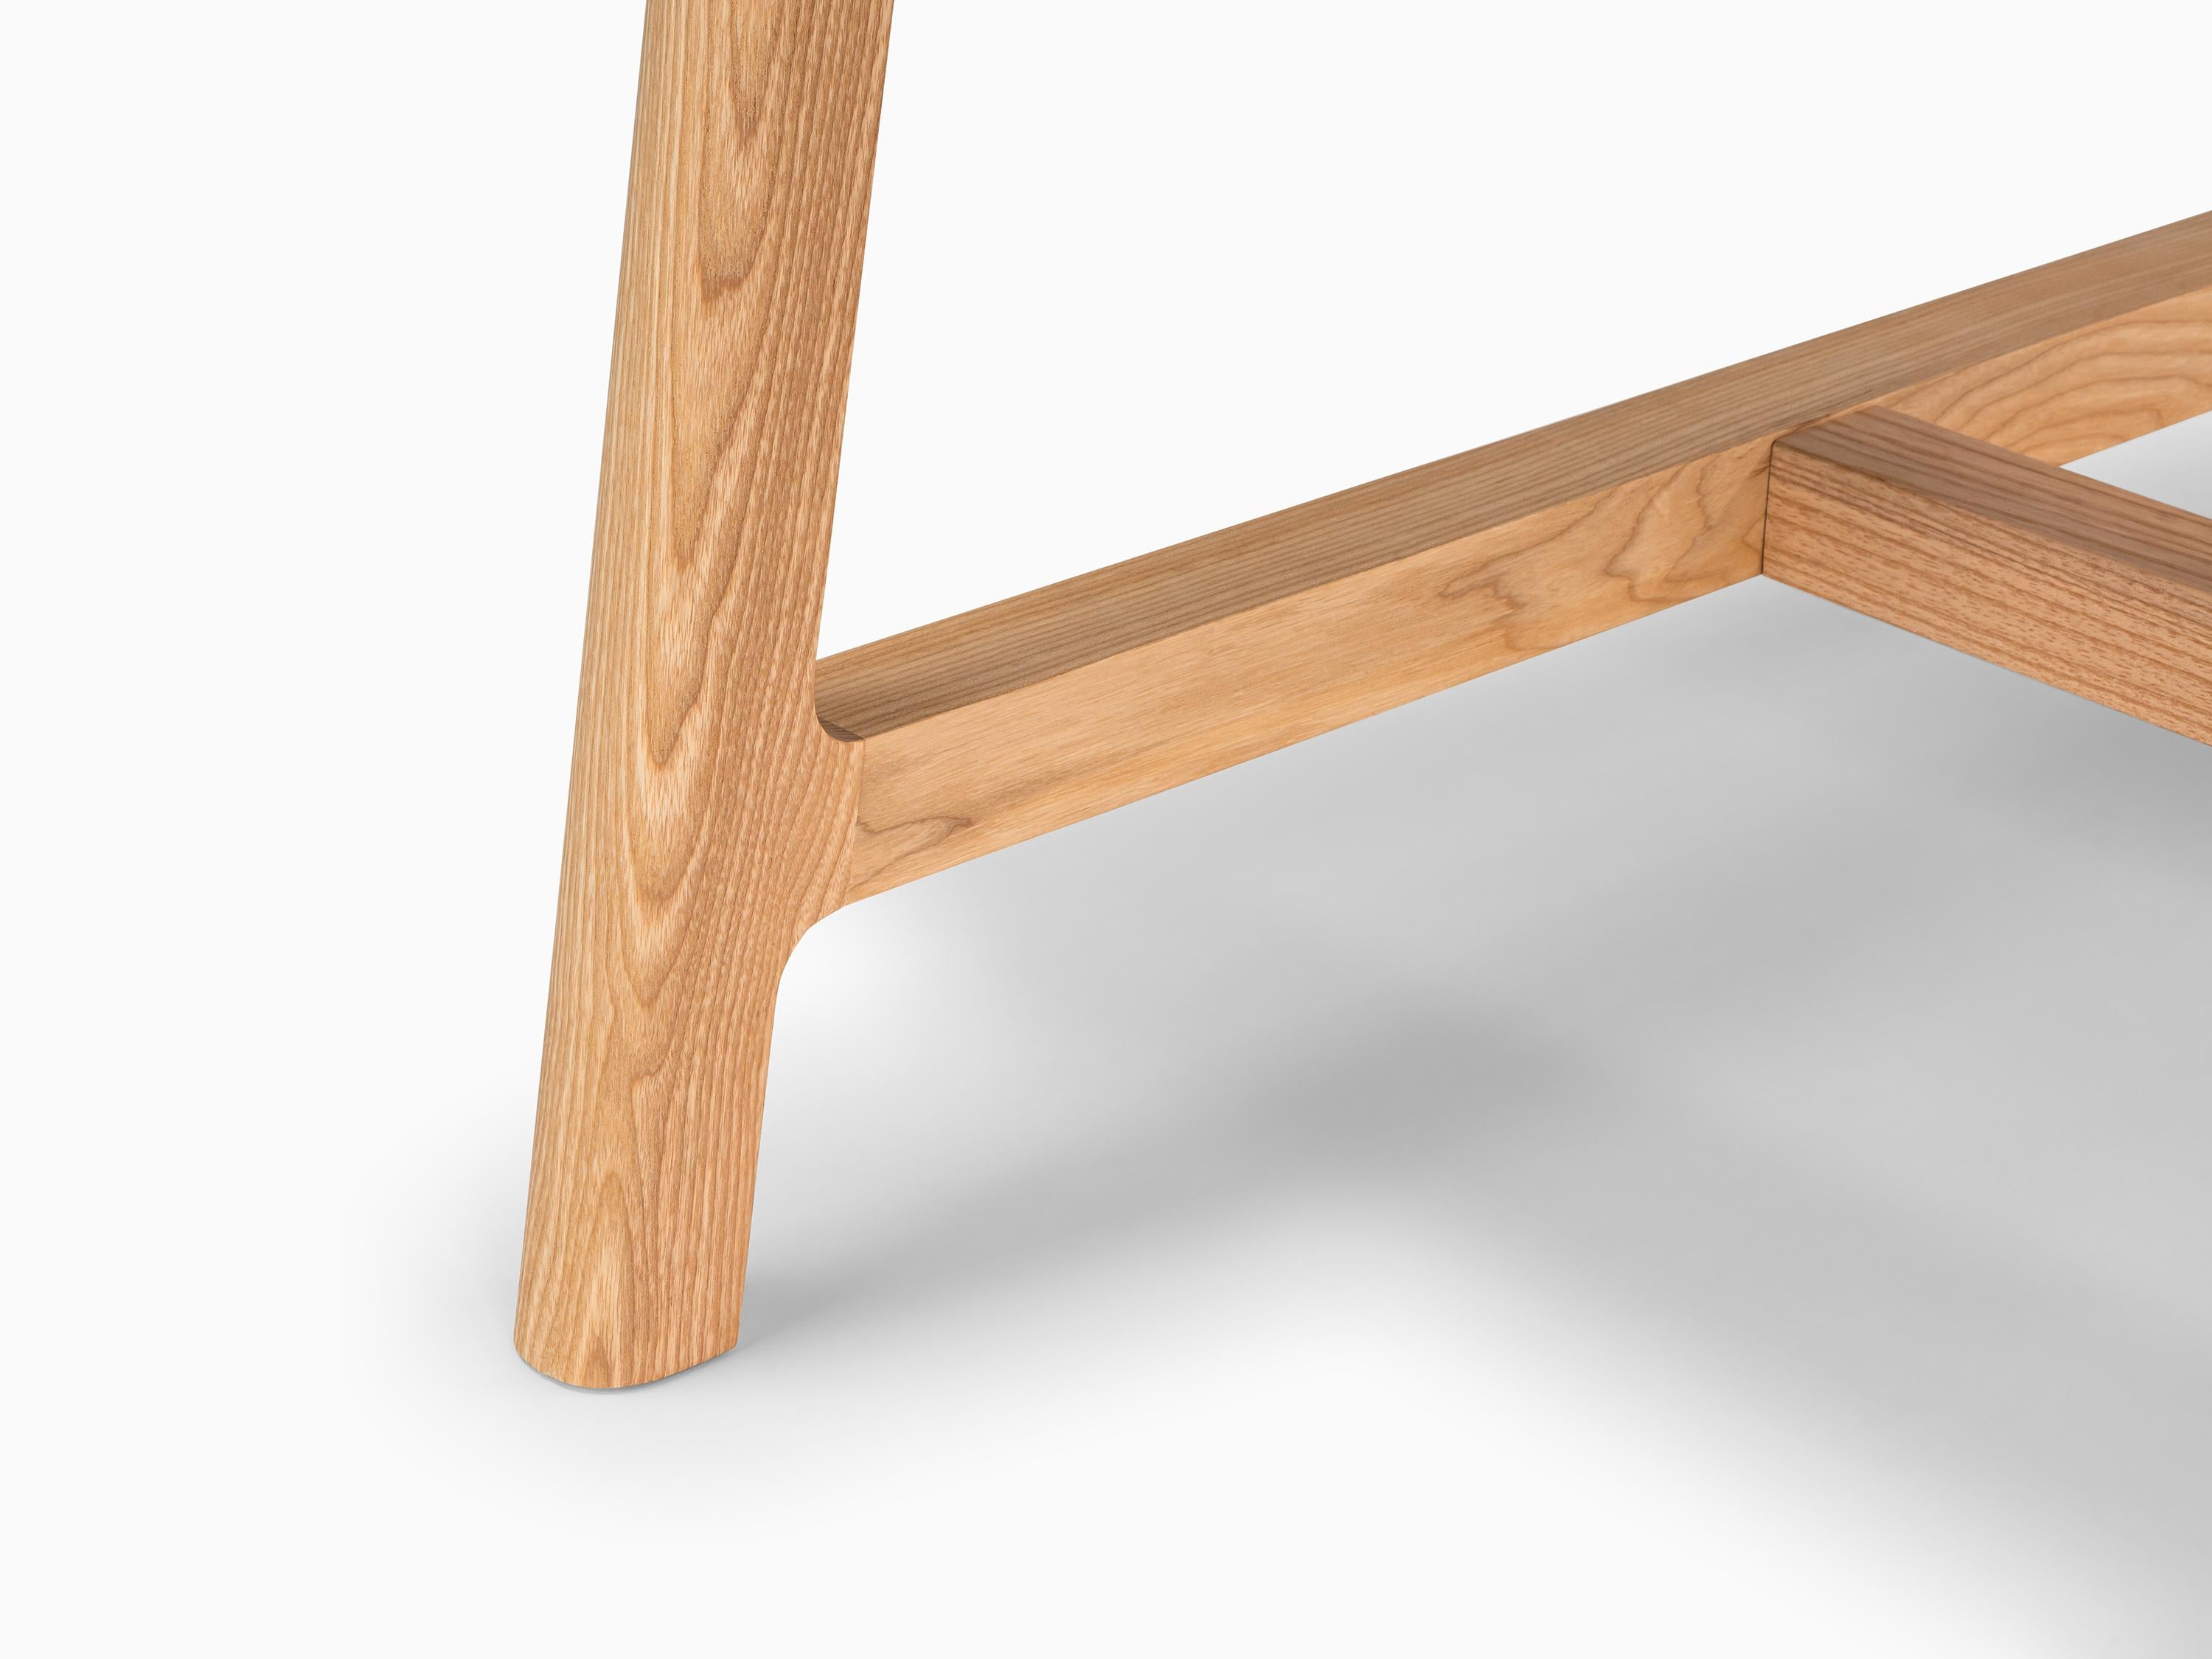 Portuguese Minimalist Modern Table in Ash Wood FRAME Collection For Sale